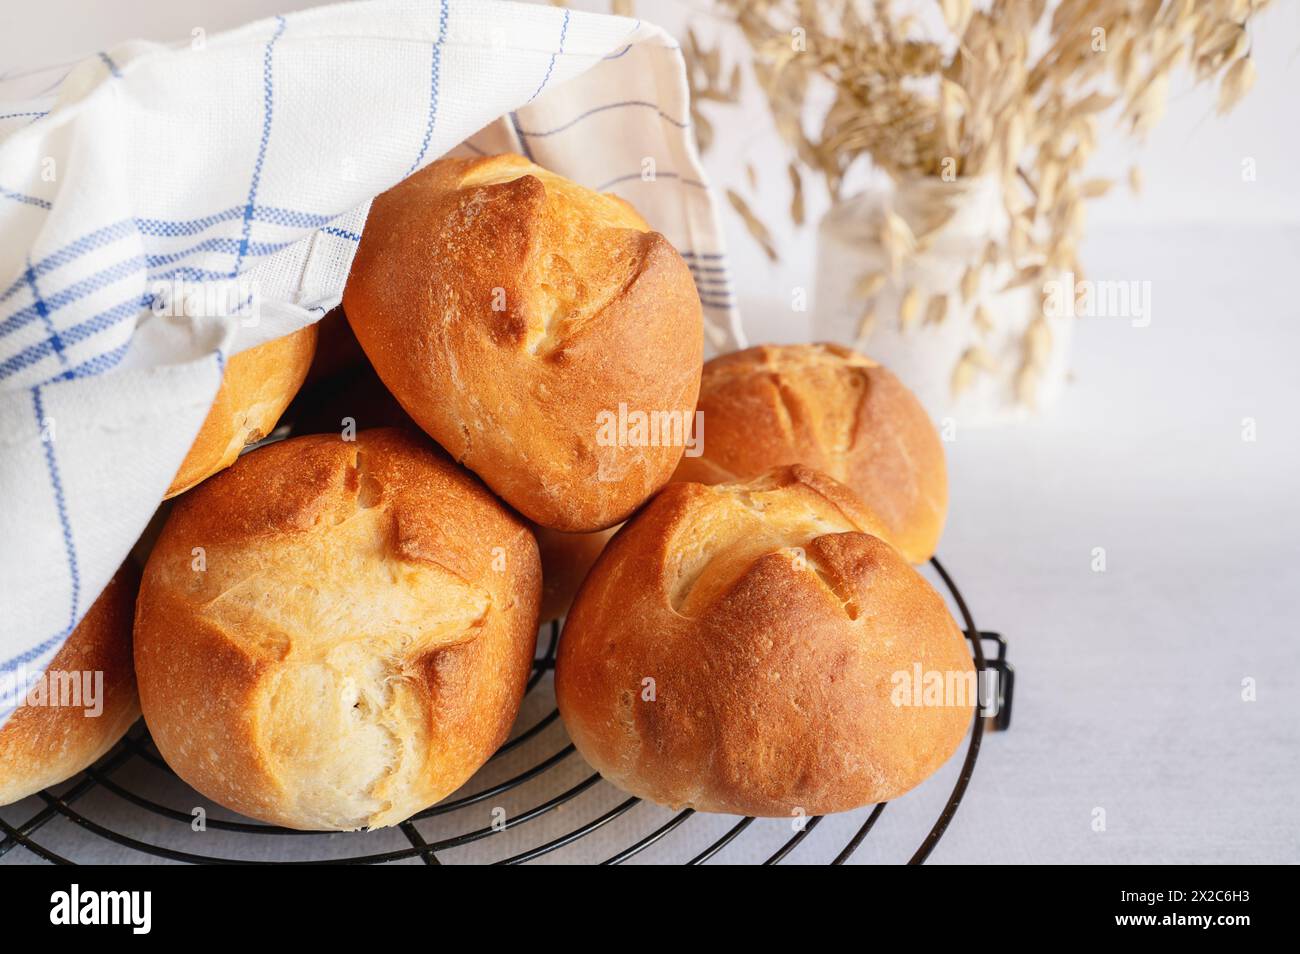 homemade buns. Homemade buns on wood board with wheat ears. Homemade Dinner Rolls, selective focus. Stock Photo